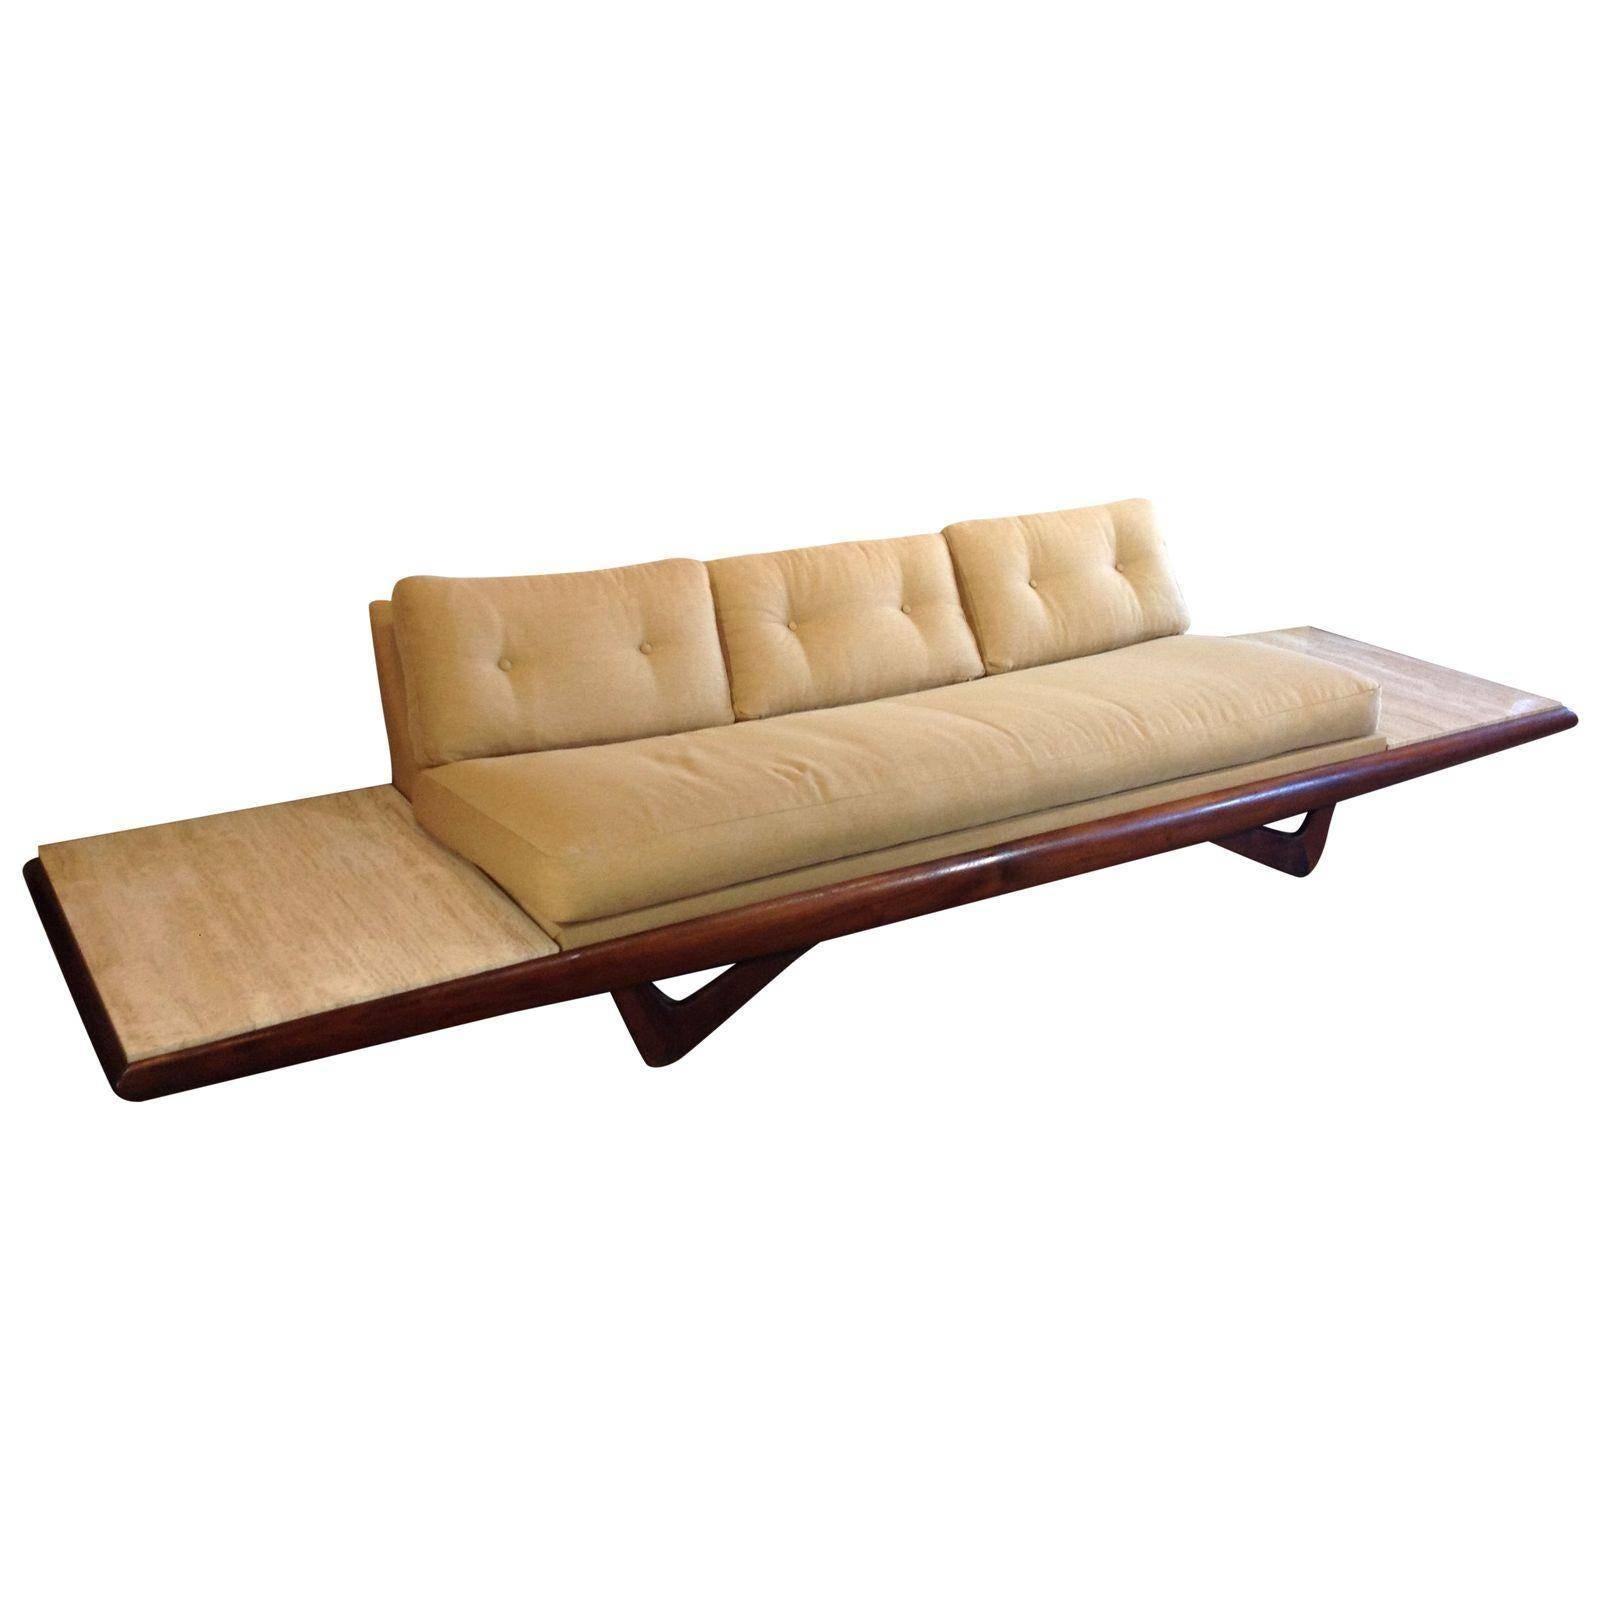 Atomic Mid Century Modern Sofa Couch by Adrian Pearsall, for Craft Associates For Sale